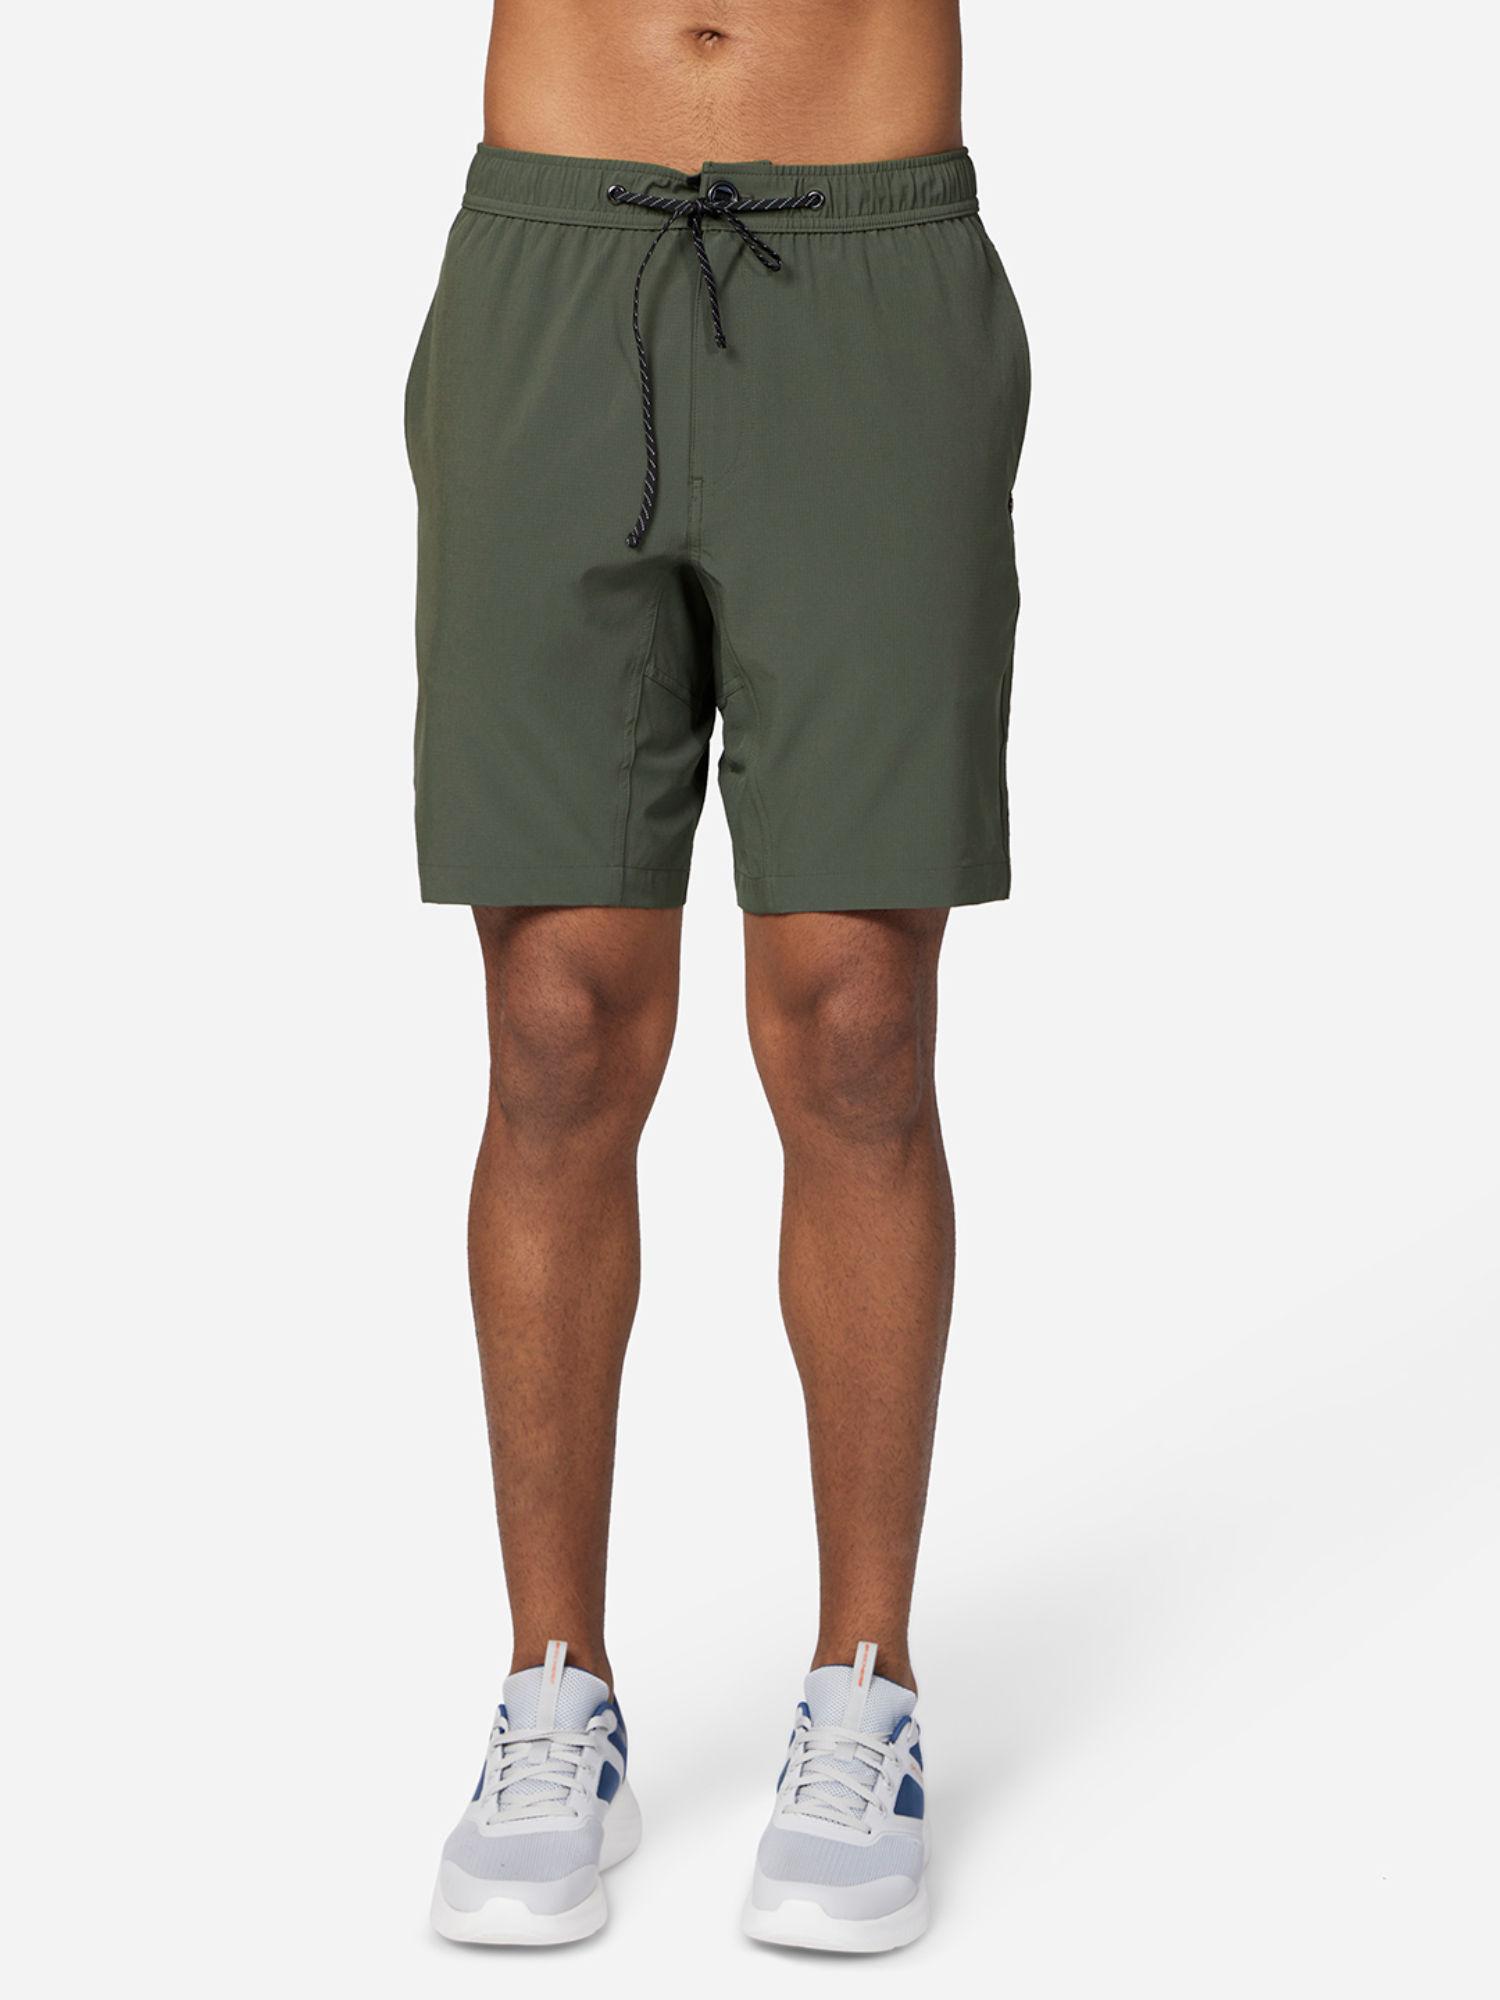 weave tear stop 9 shorts olive green